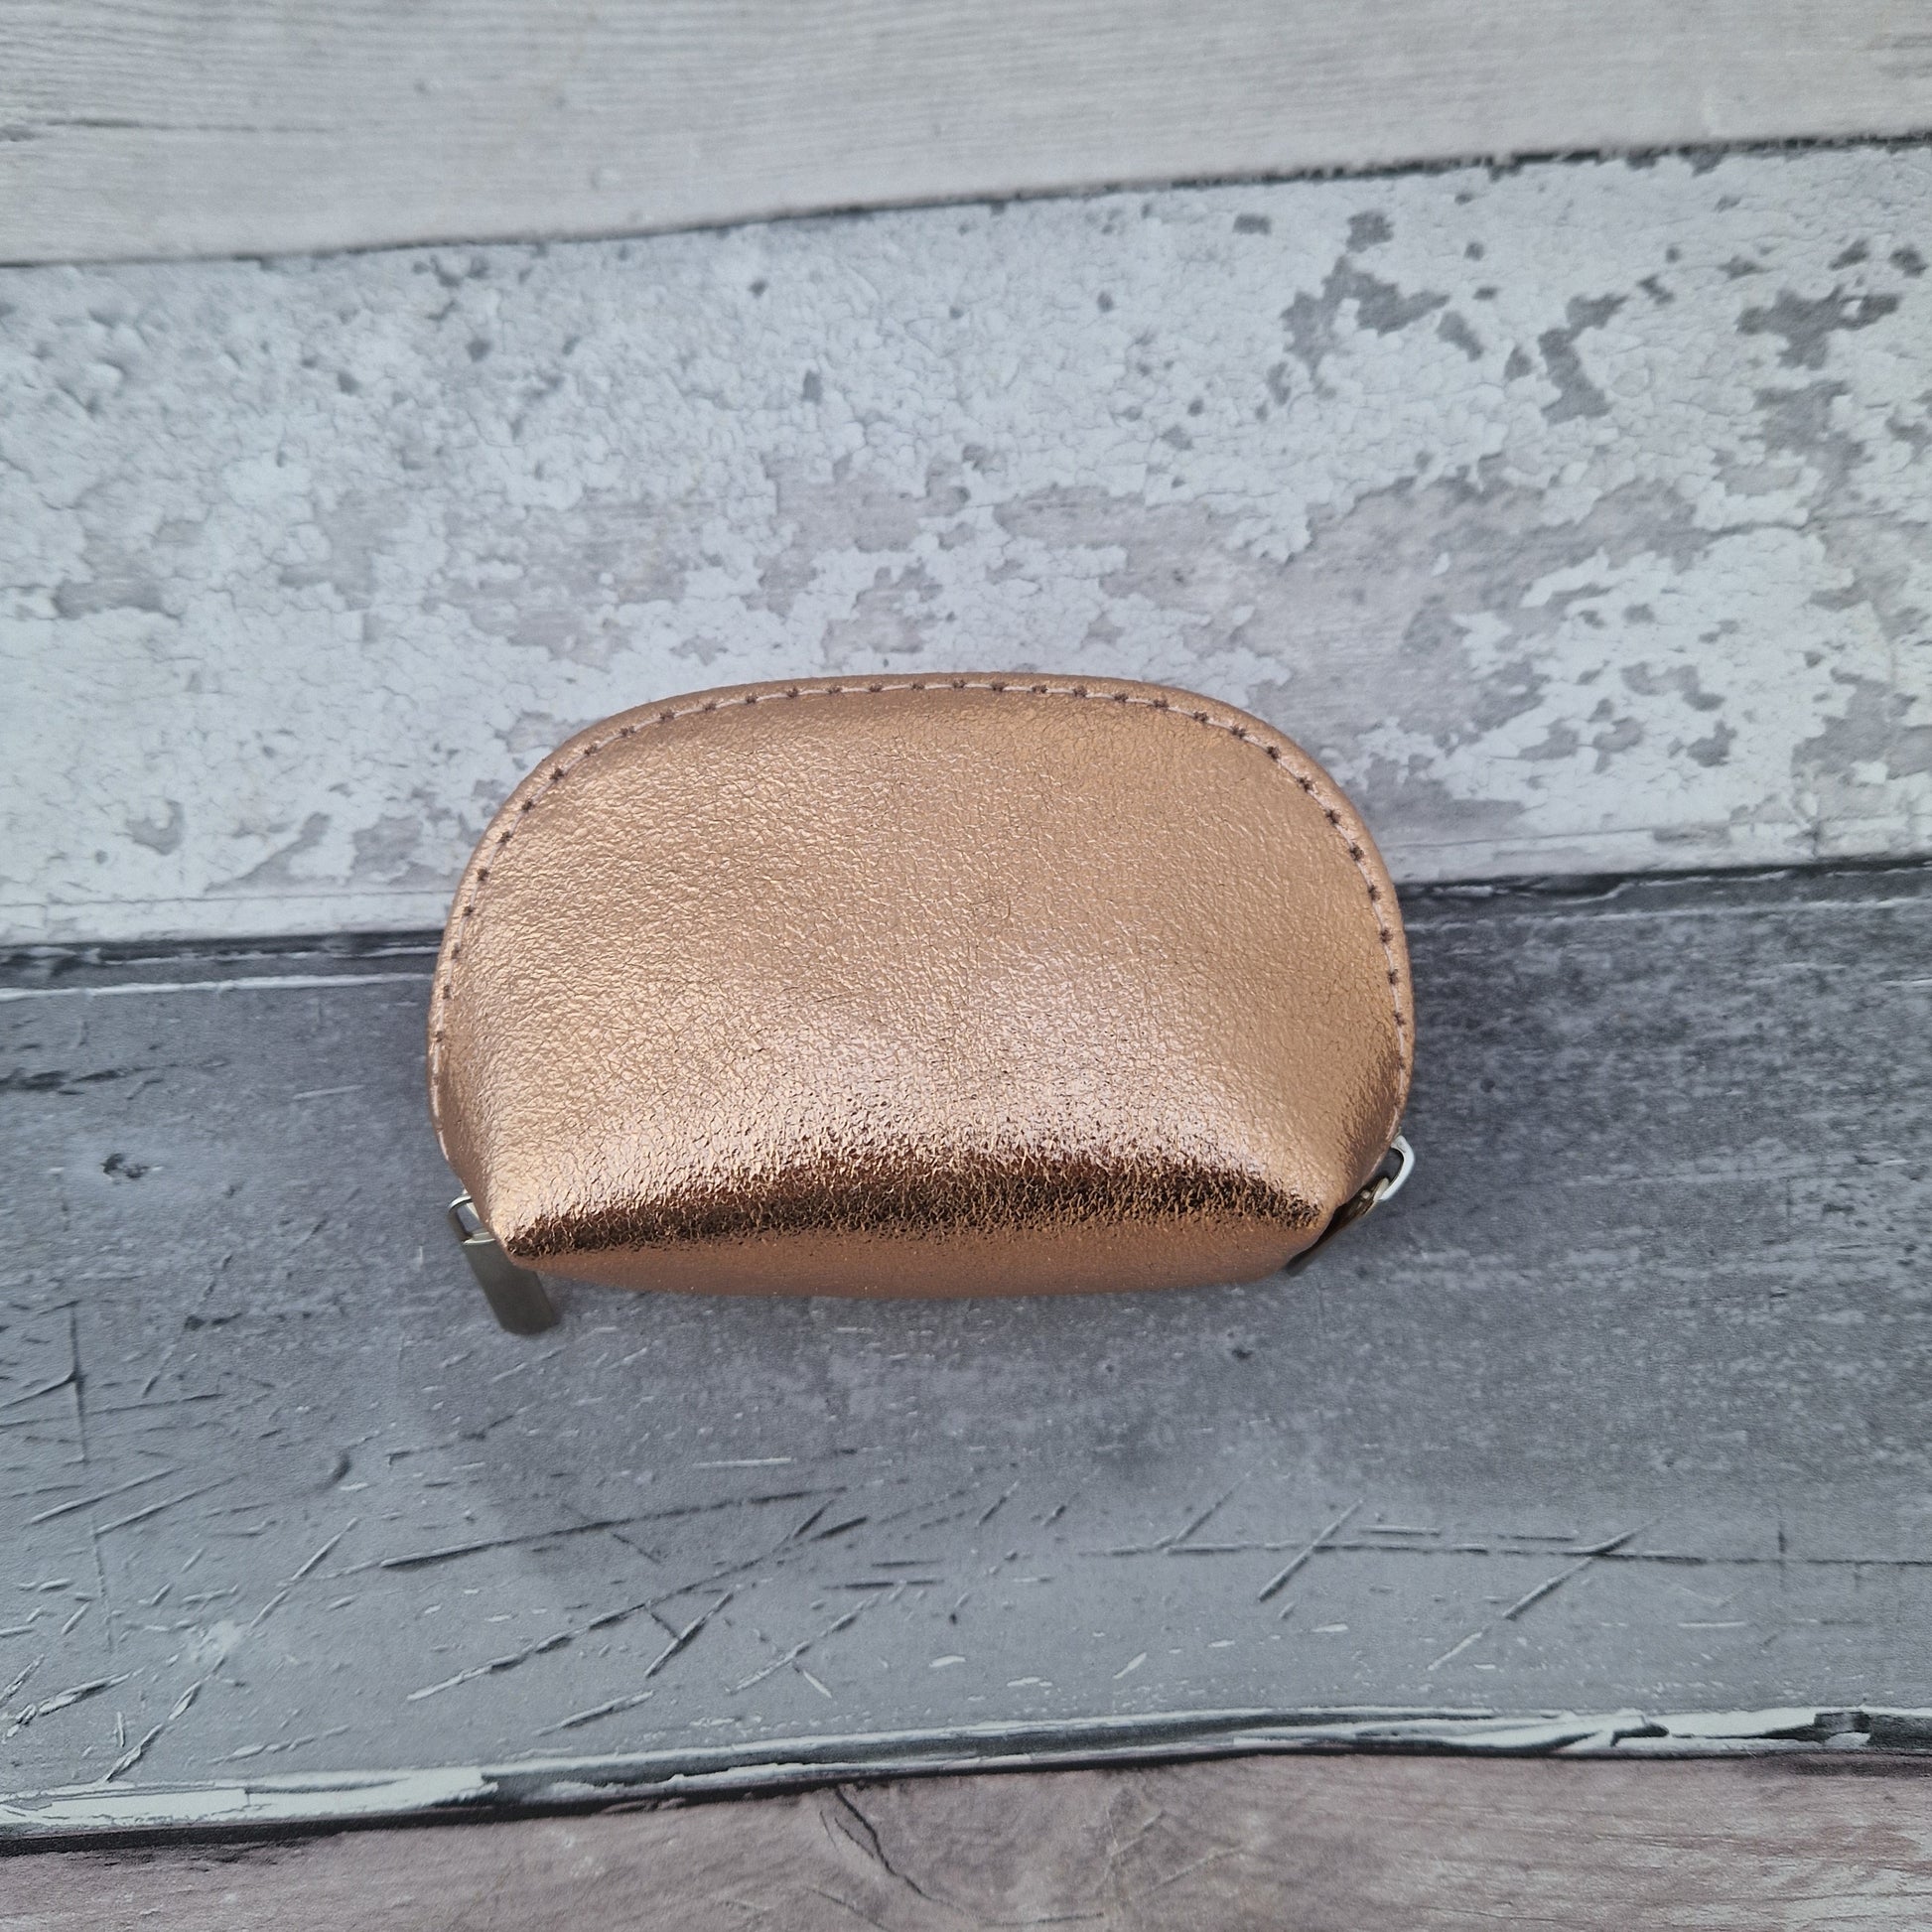 Metallic Rose Gold Leather Coin purse